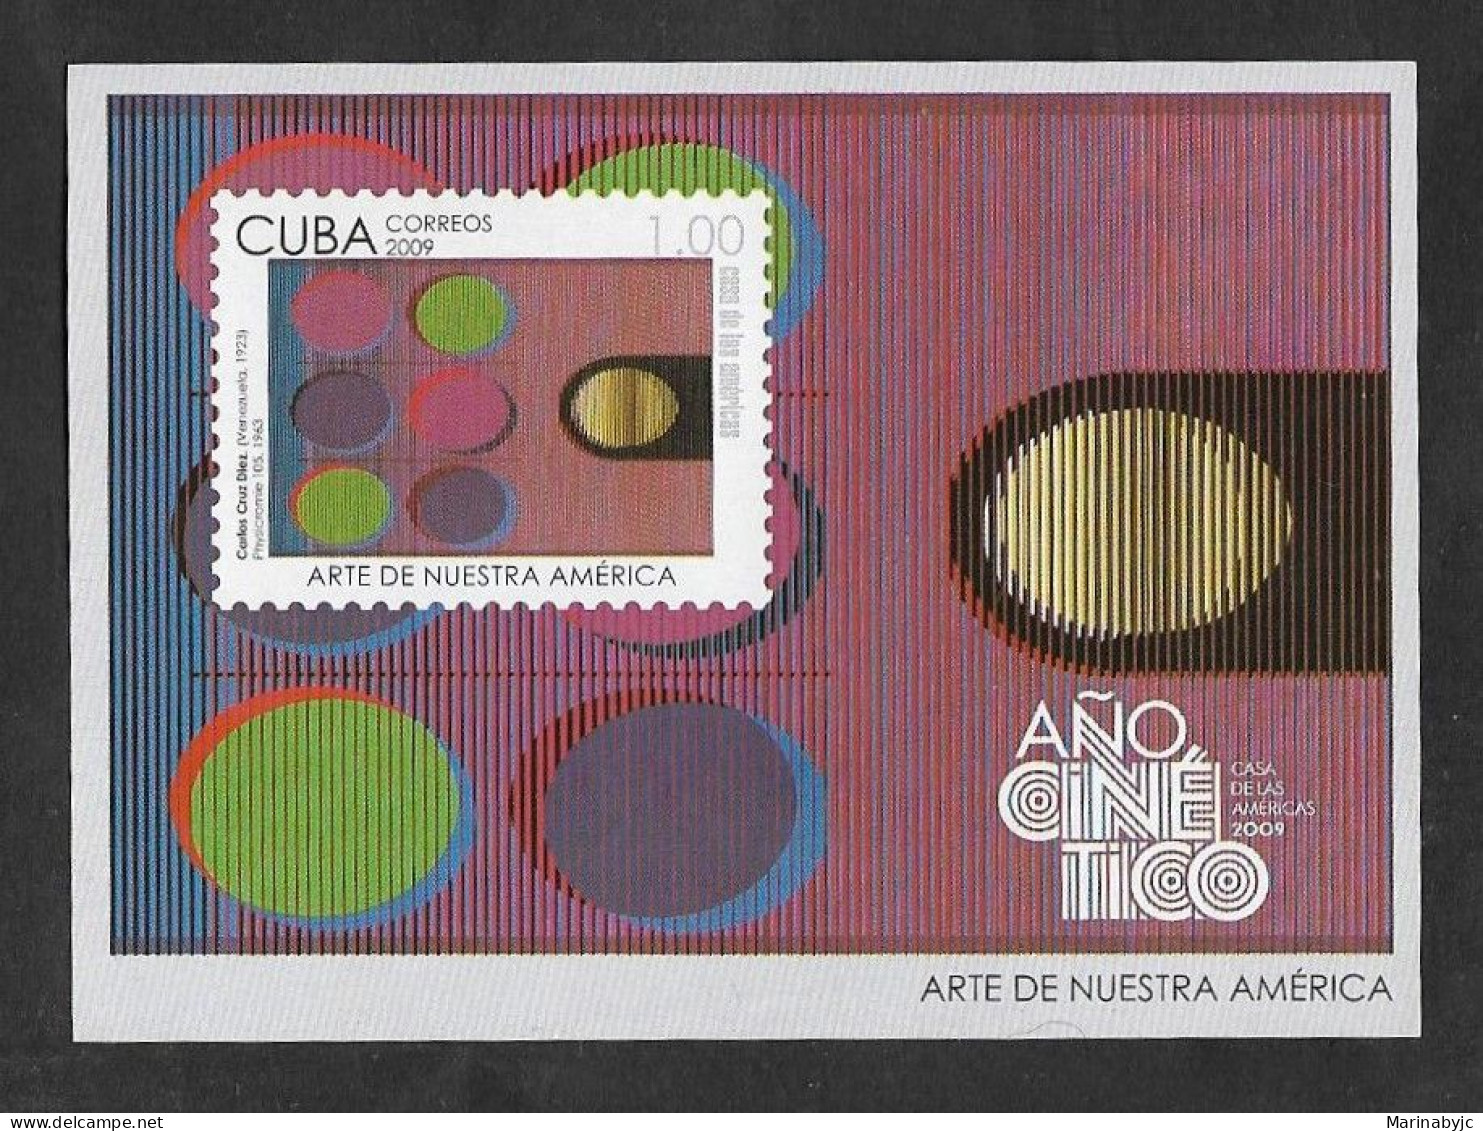 SE)2009 CUBA, FROM THE CINETIC ART SERIES, HOUSE OF THE AMERICAS, SS, MNH - Usados